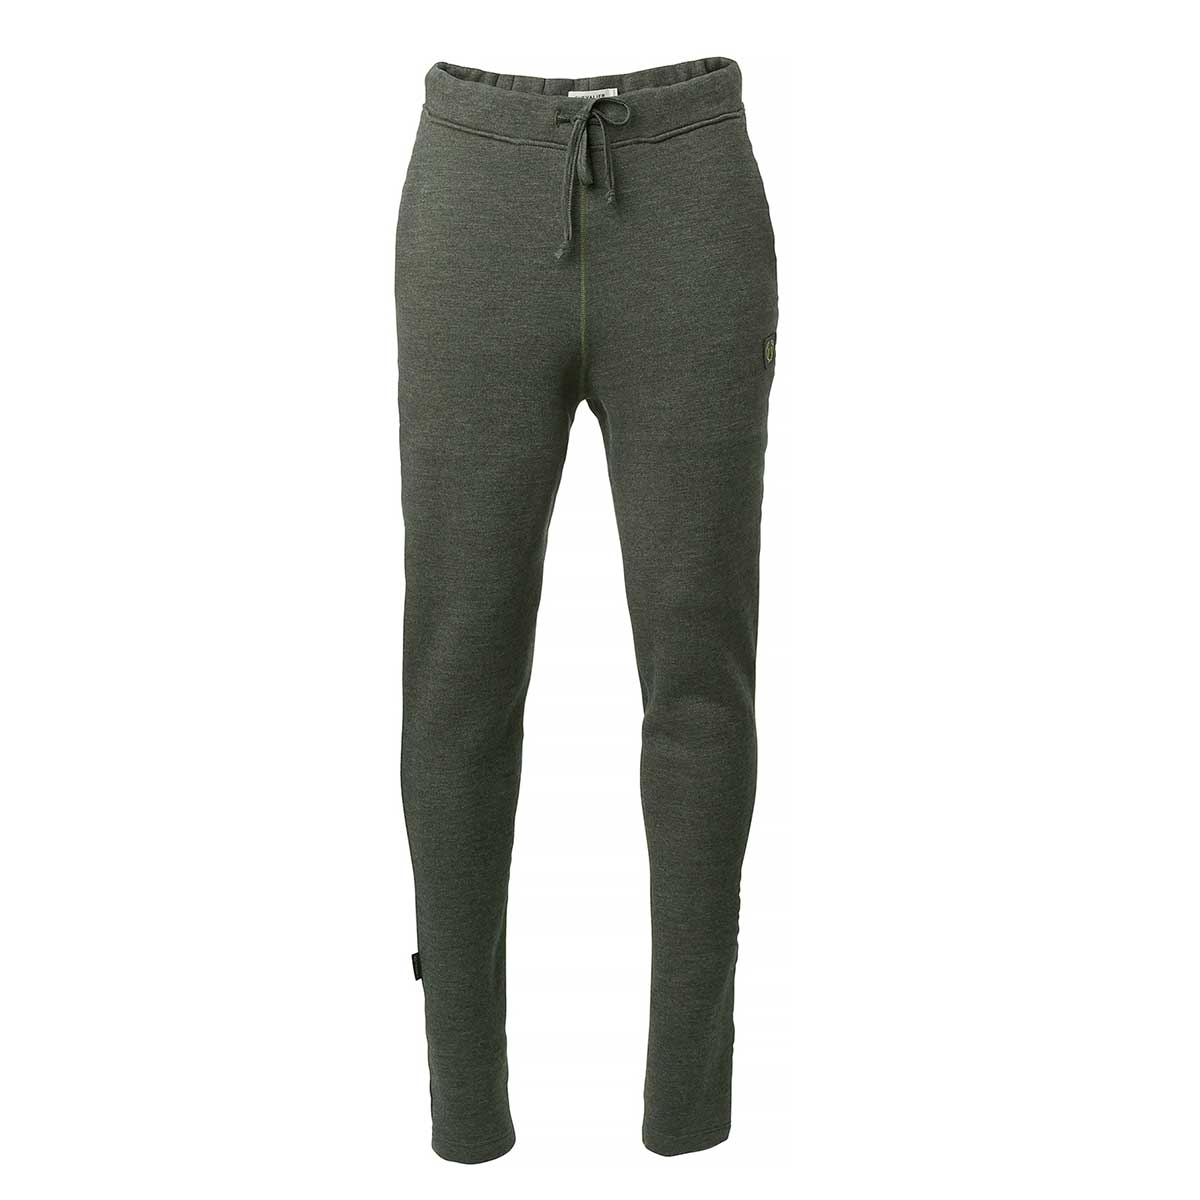 Grizzly Wool Sweatpants Men - Chevalier